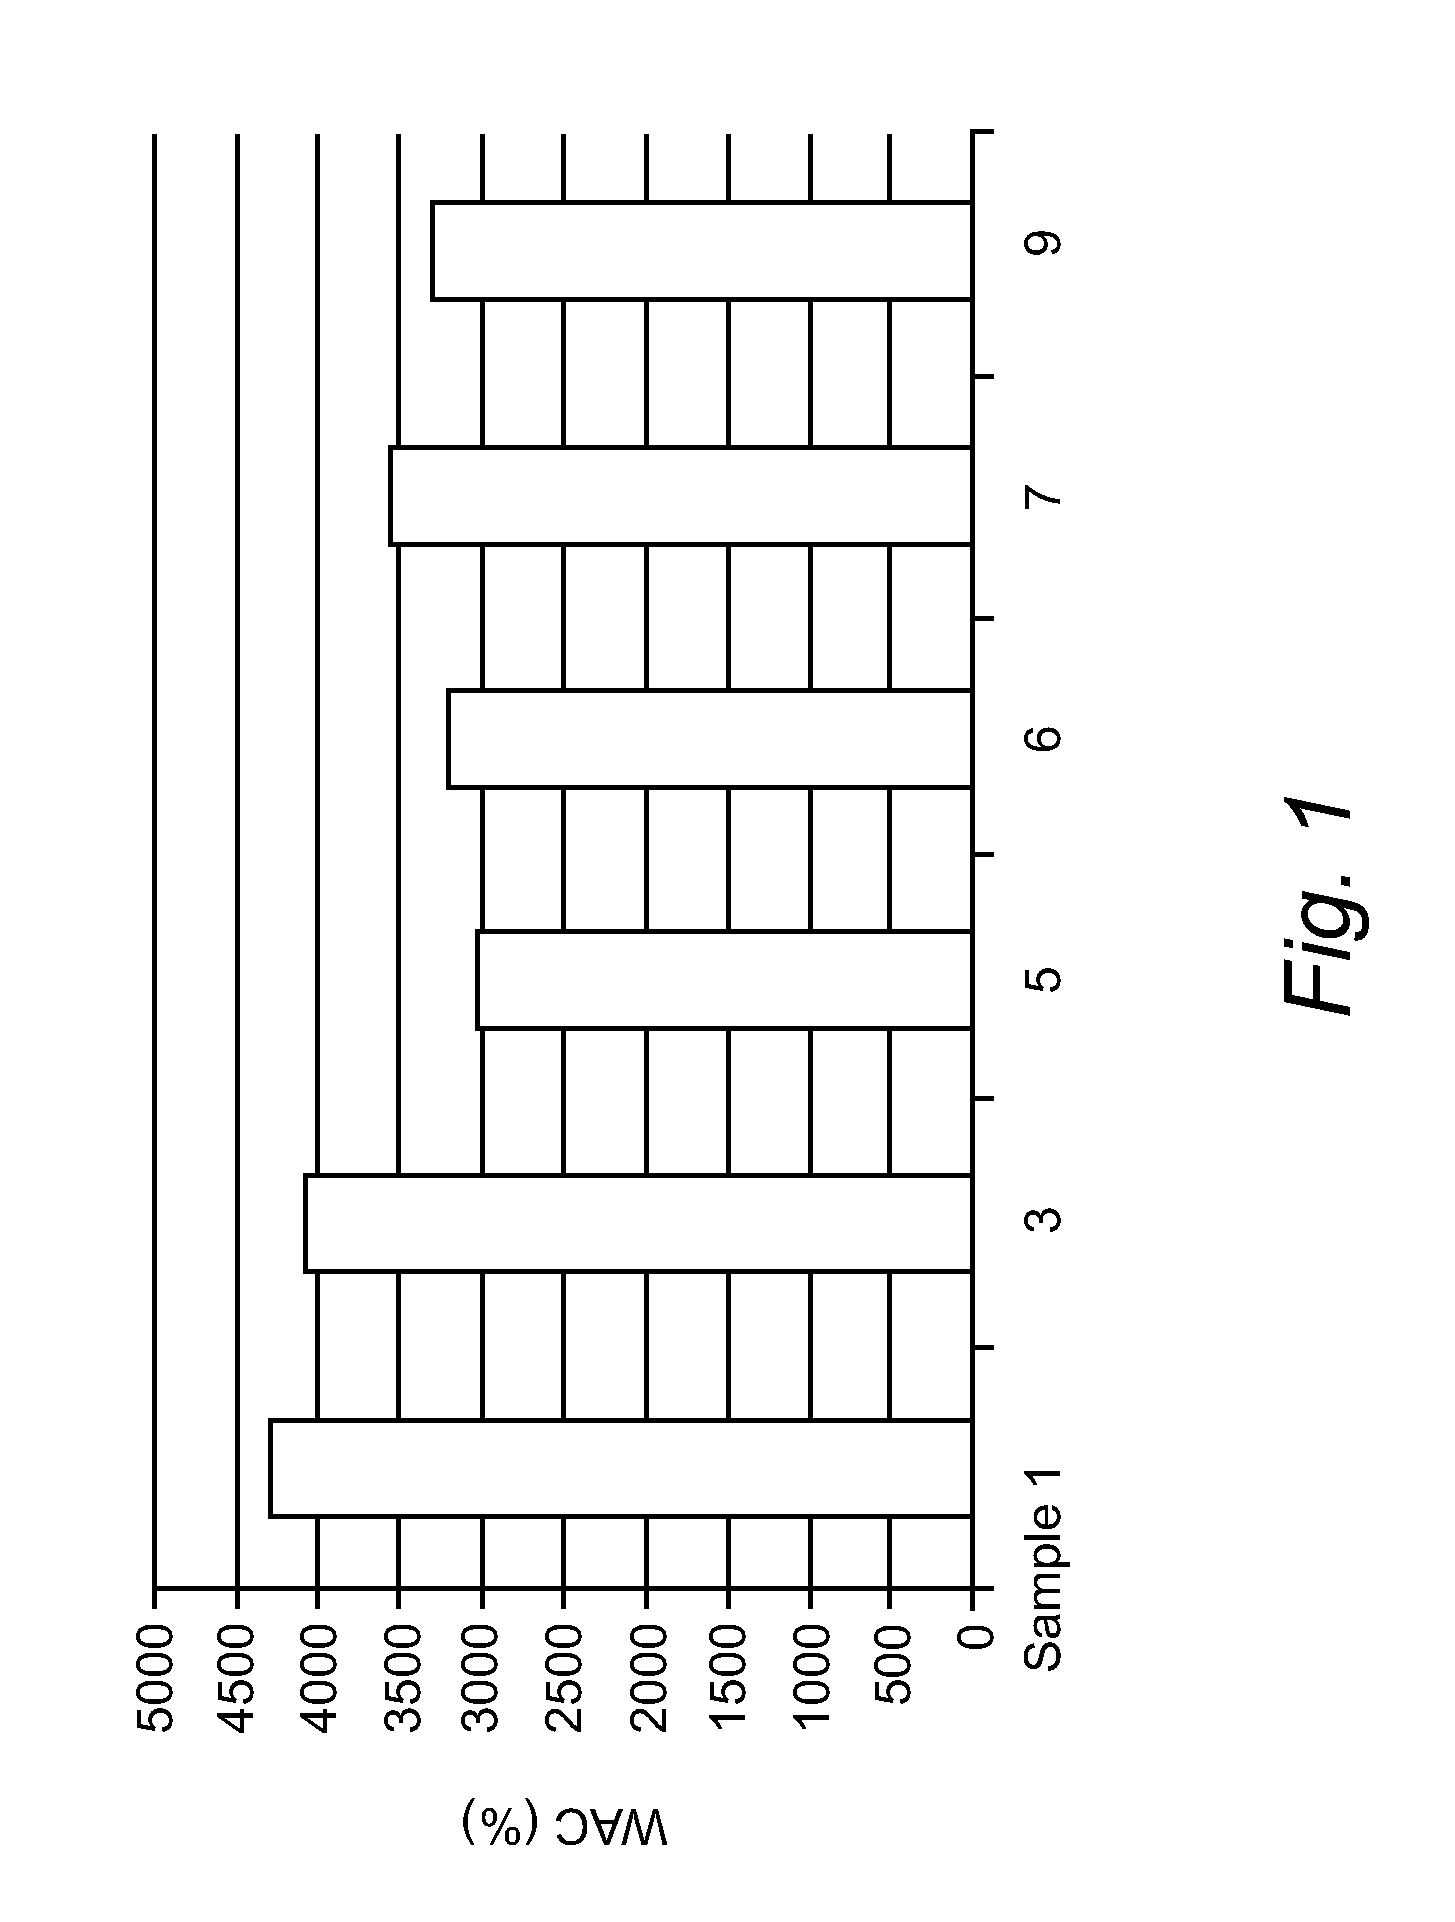 Hyaluronic acid cryogel - compositions, uses, processes for manufacturing